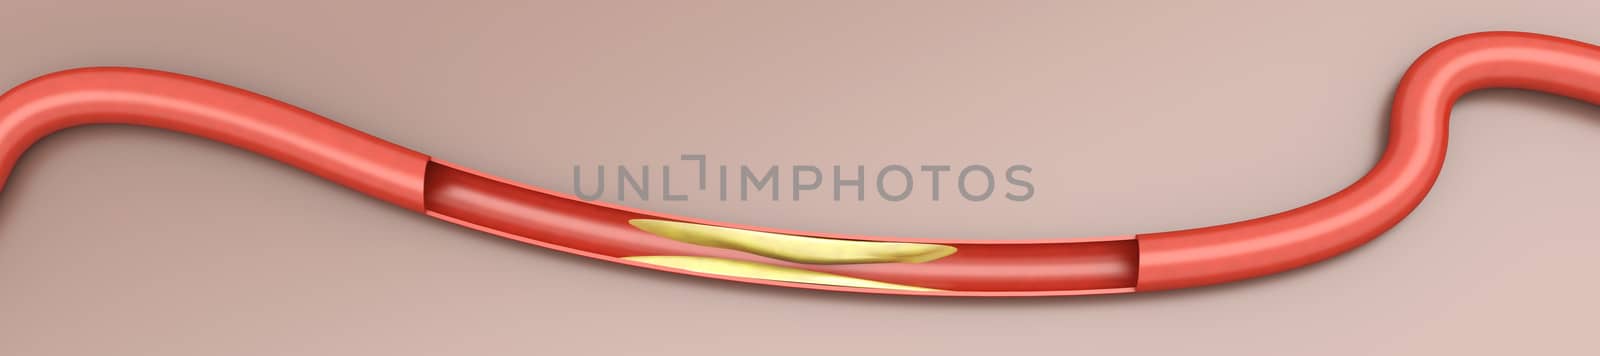 Arteriosclerosis. Plaques tightening an artery. 3D rendered Illustration.  